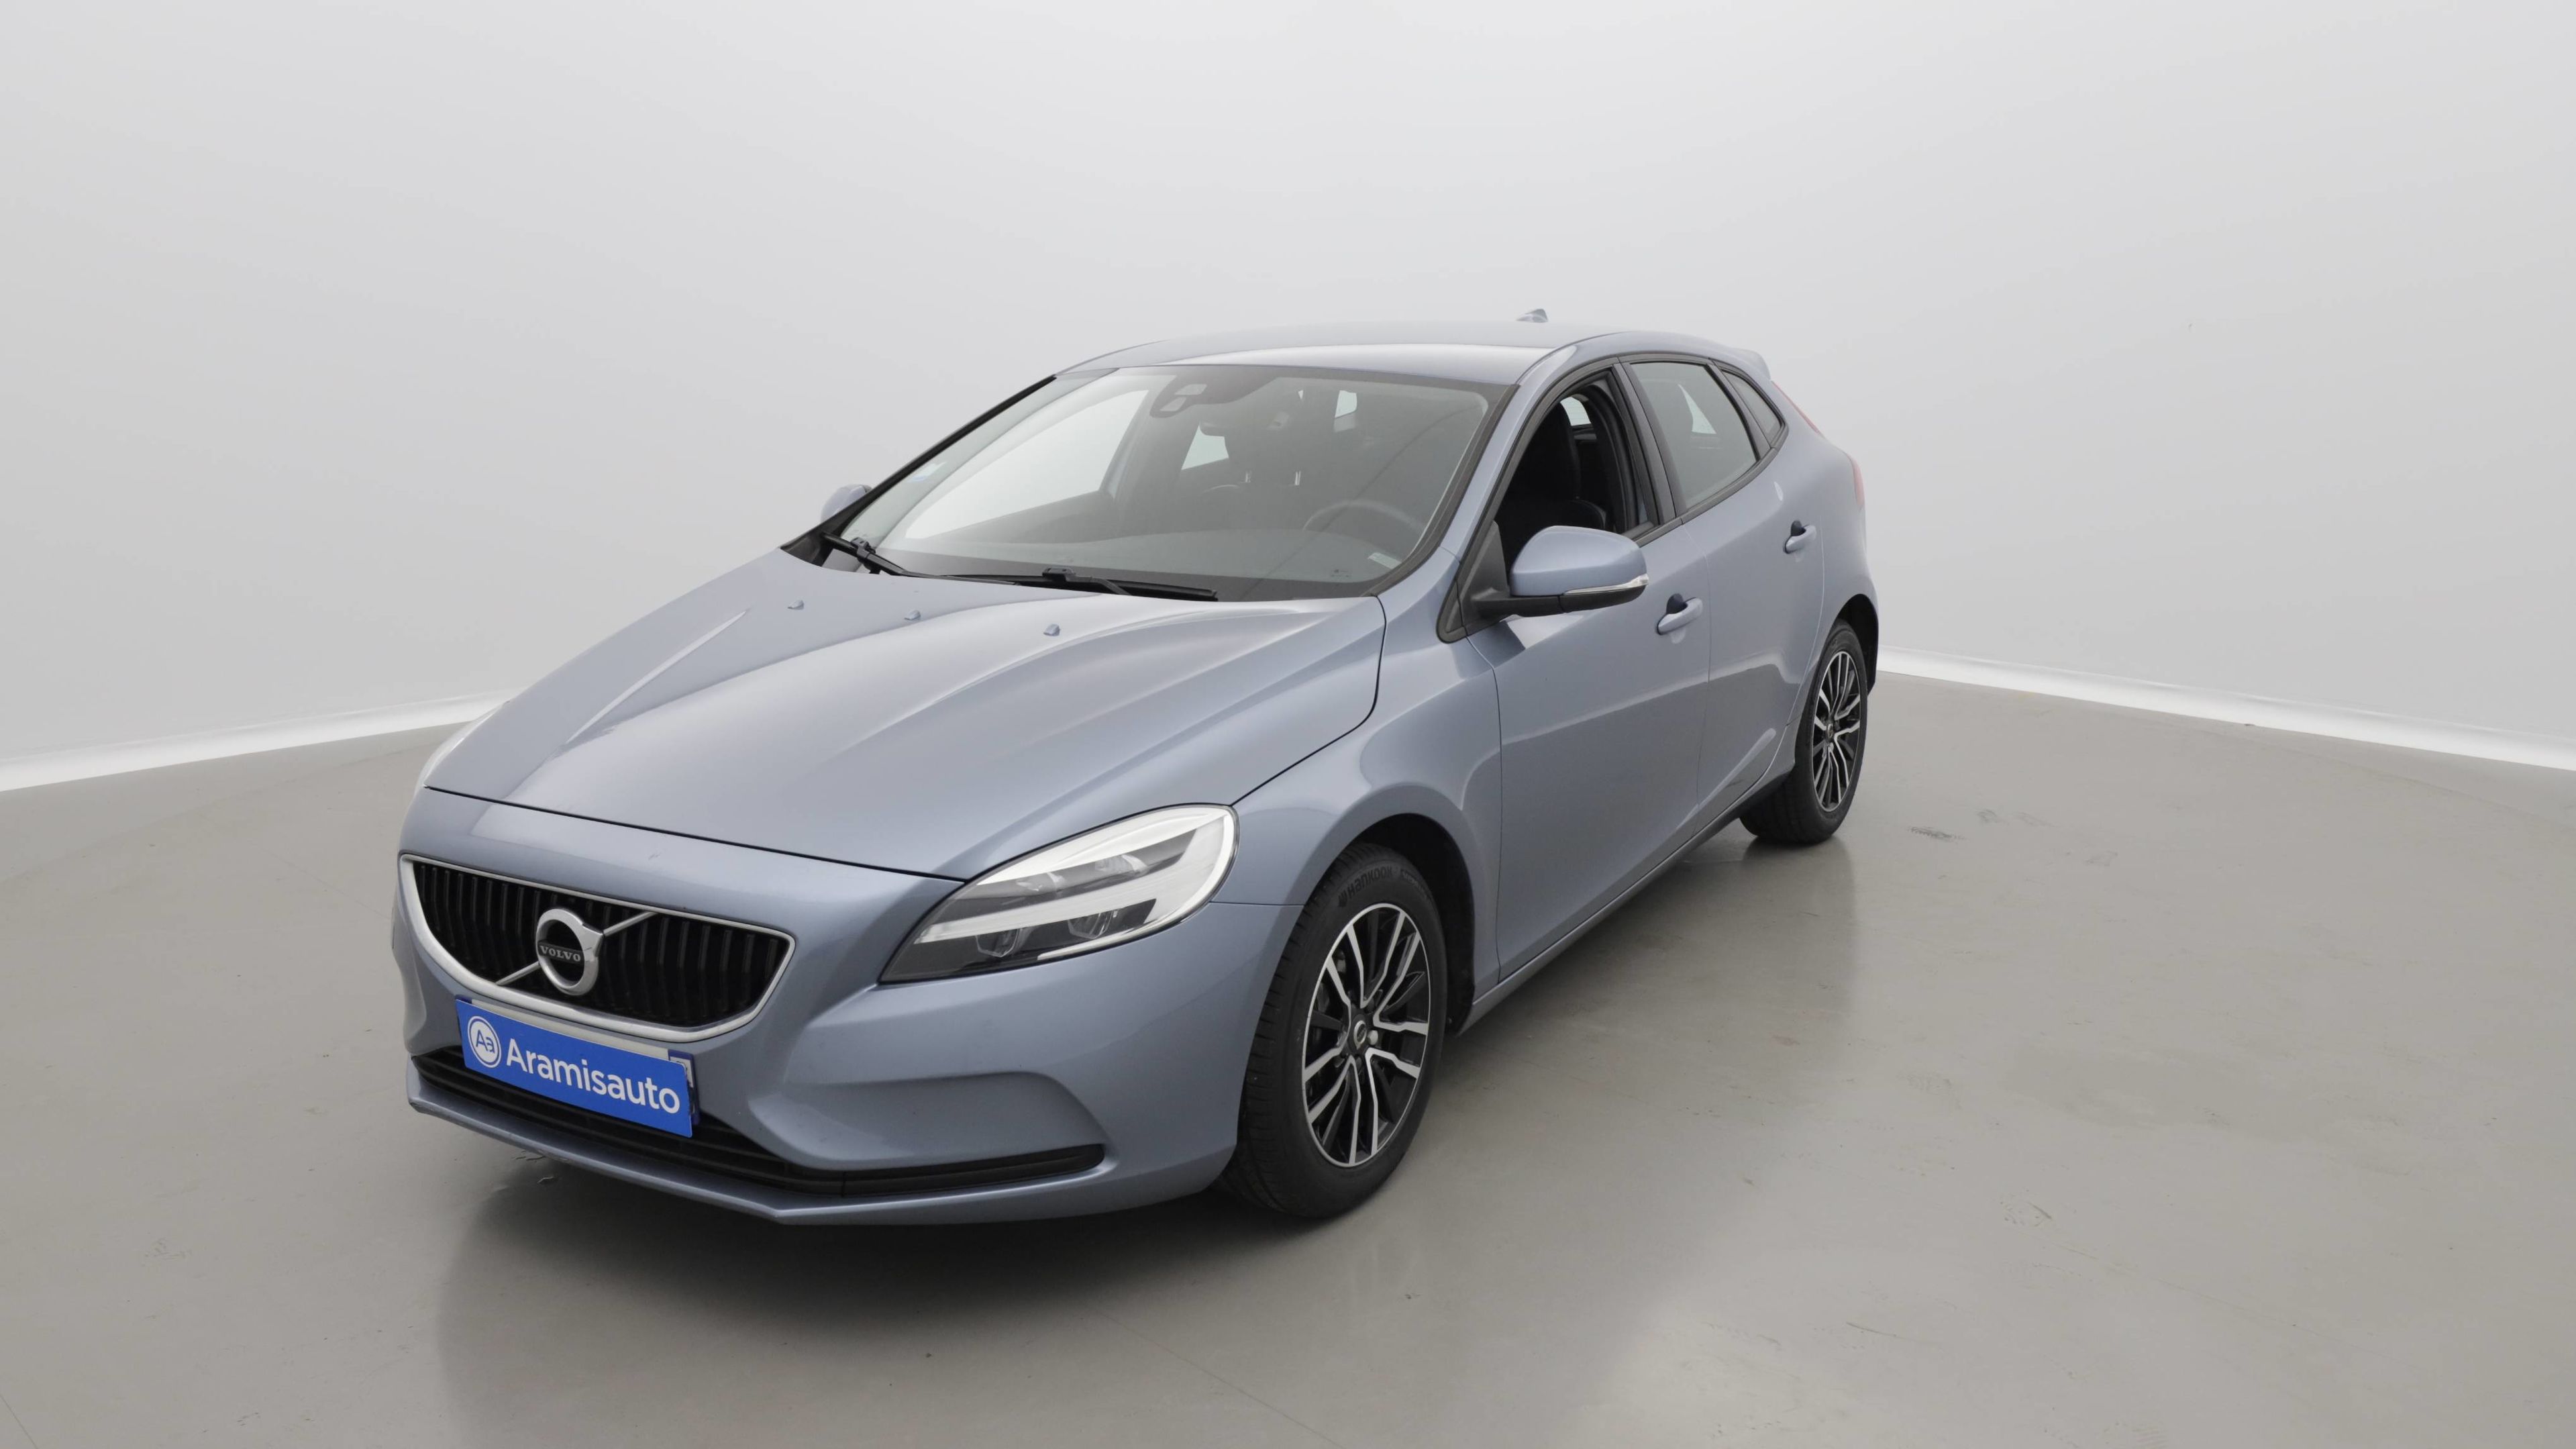 Volvo V40 d'occasion reconditionnée - 2.0 D3 AdBlue 150 Geartronic 6  Business - 5 portes - Diesel - rv773295 - Aramisauto